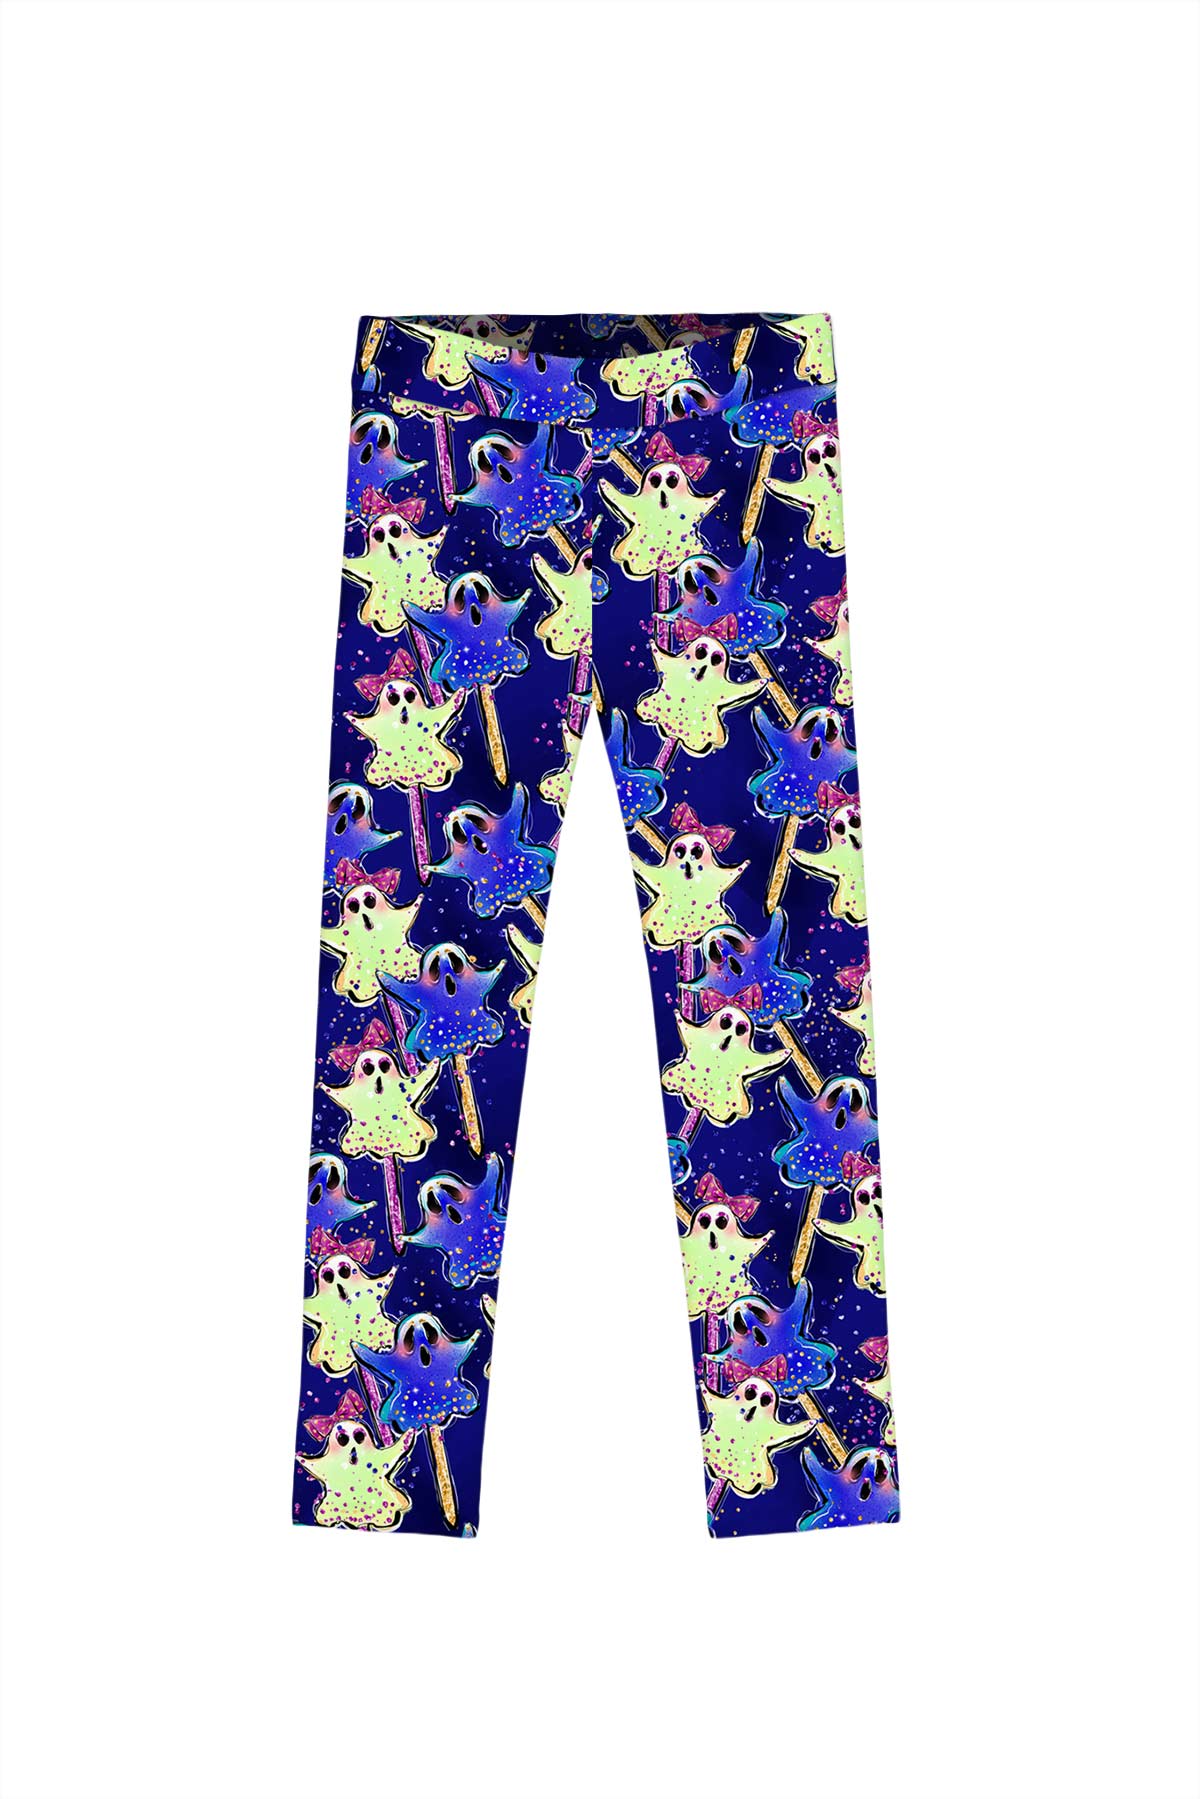 Trick or Treat Lucy Blue Boo Print Leggings - Kids - Pineapple Clothing